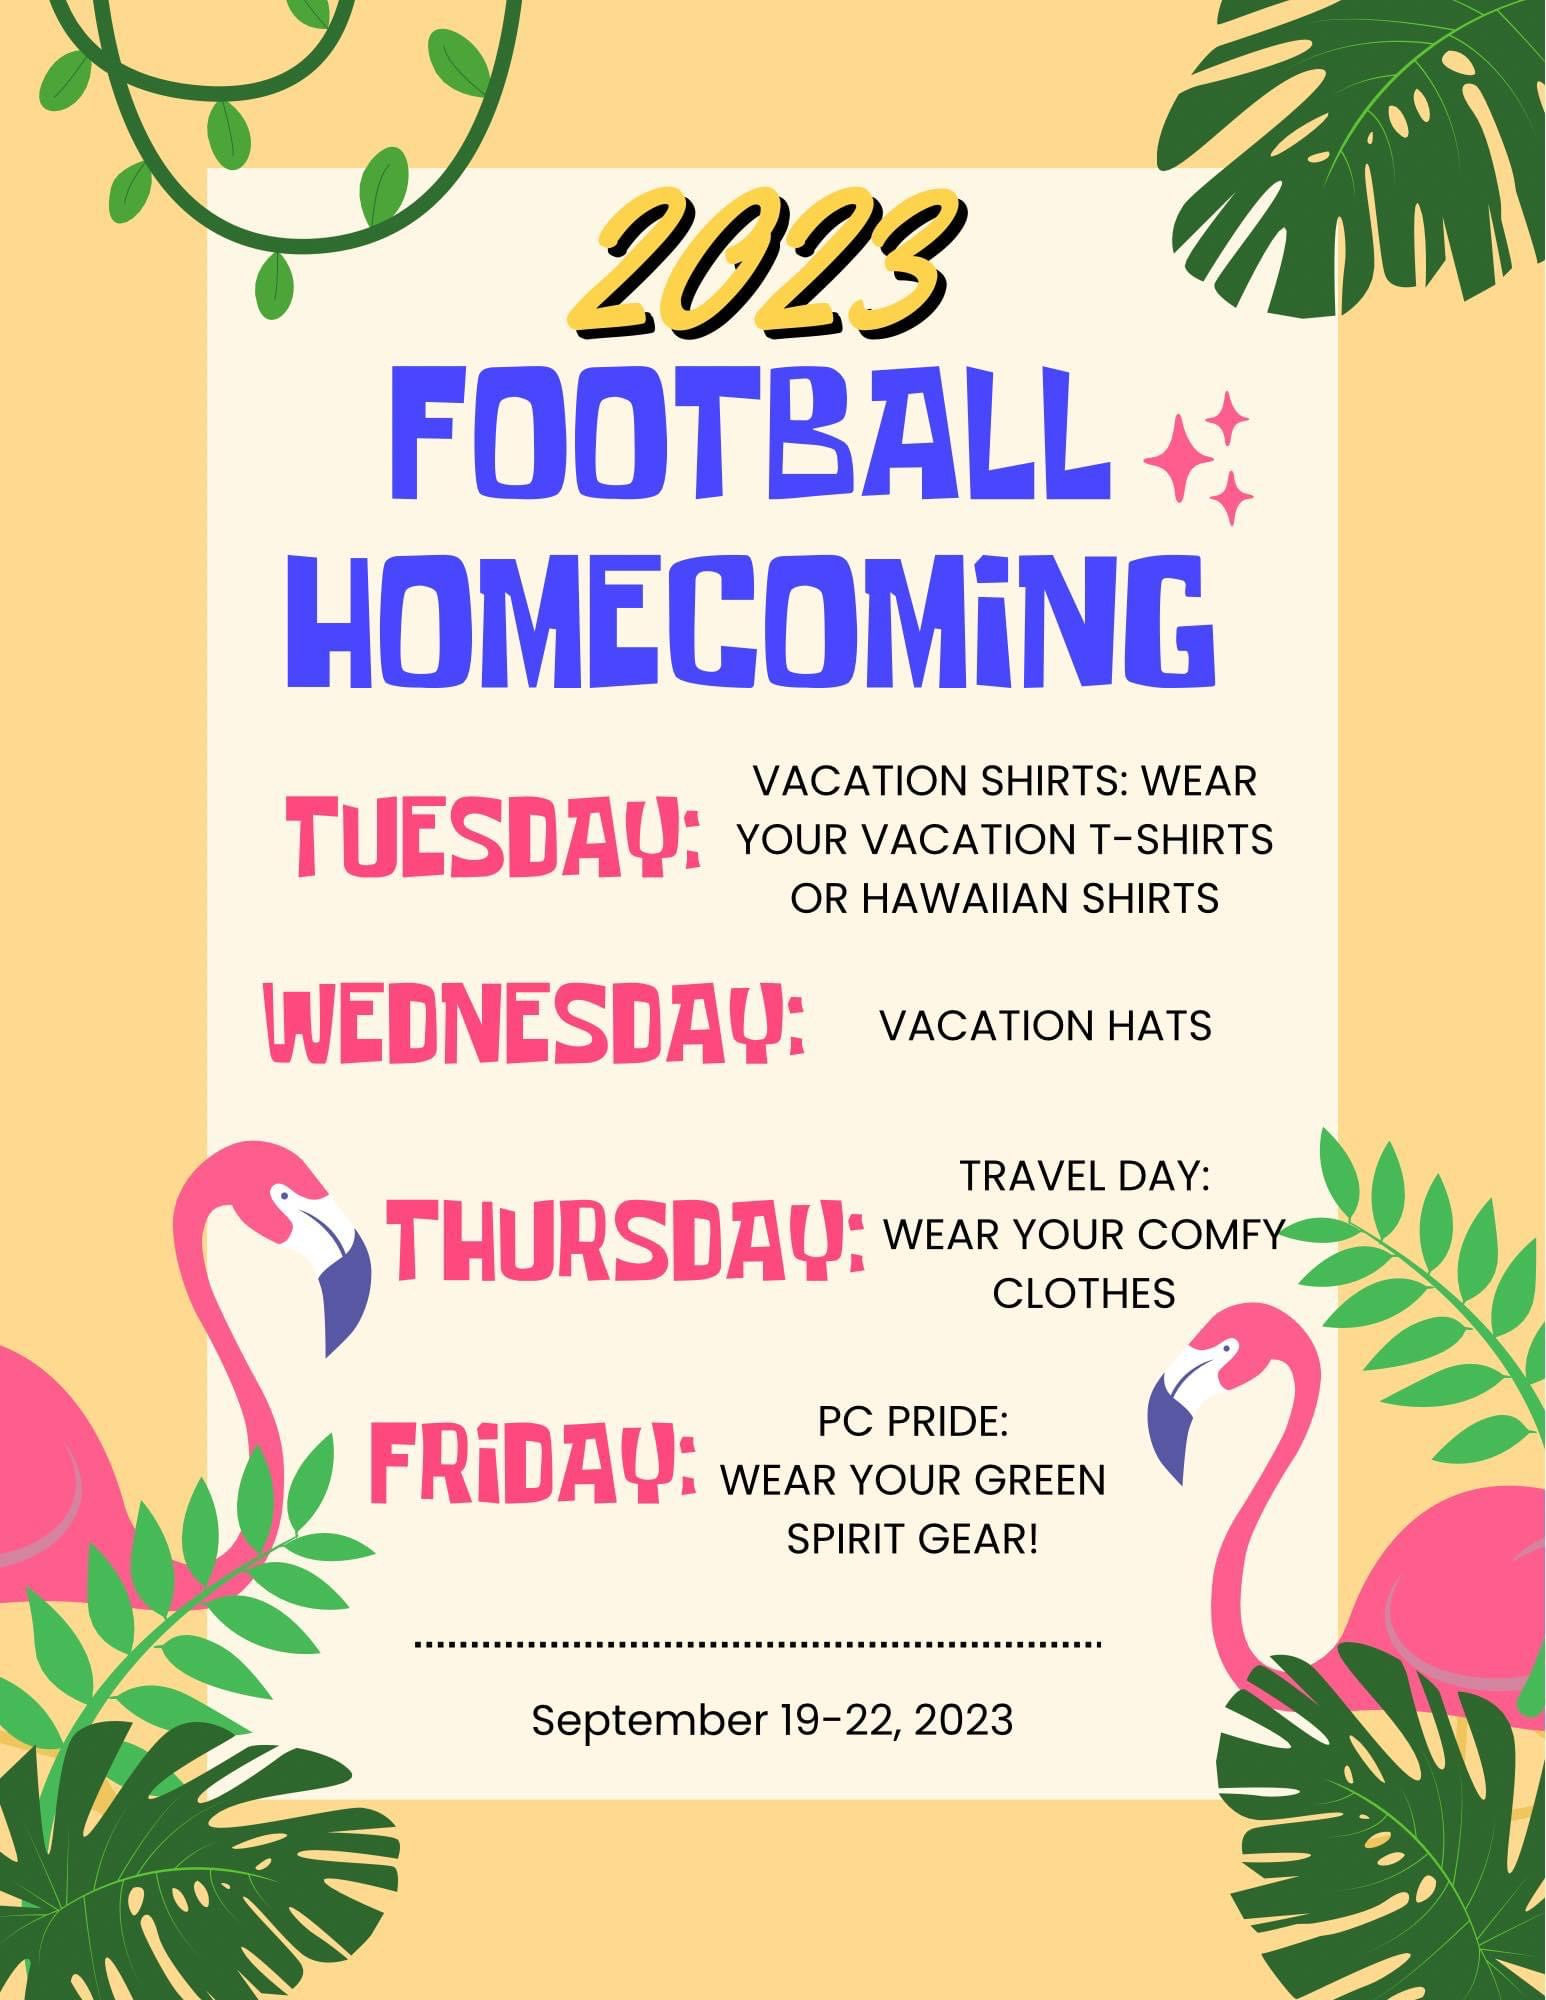 Football Homecoming Dress up days.  Tuesday: vacation shirts: wear your vacation t-shirt or Hawaiian shirts. Wednesday: Vacation hats.  Thursday: Travel Day: wear your comfy clothes.  Friday: PC pride: wear your green spirit gear!  September 19-22, 2023